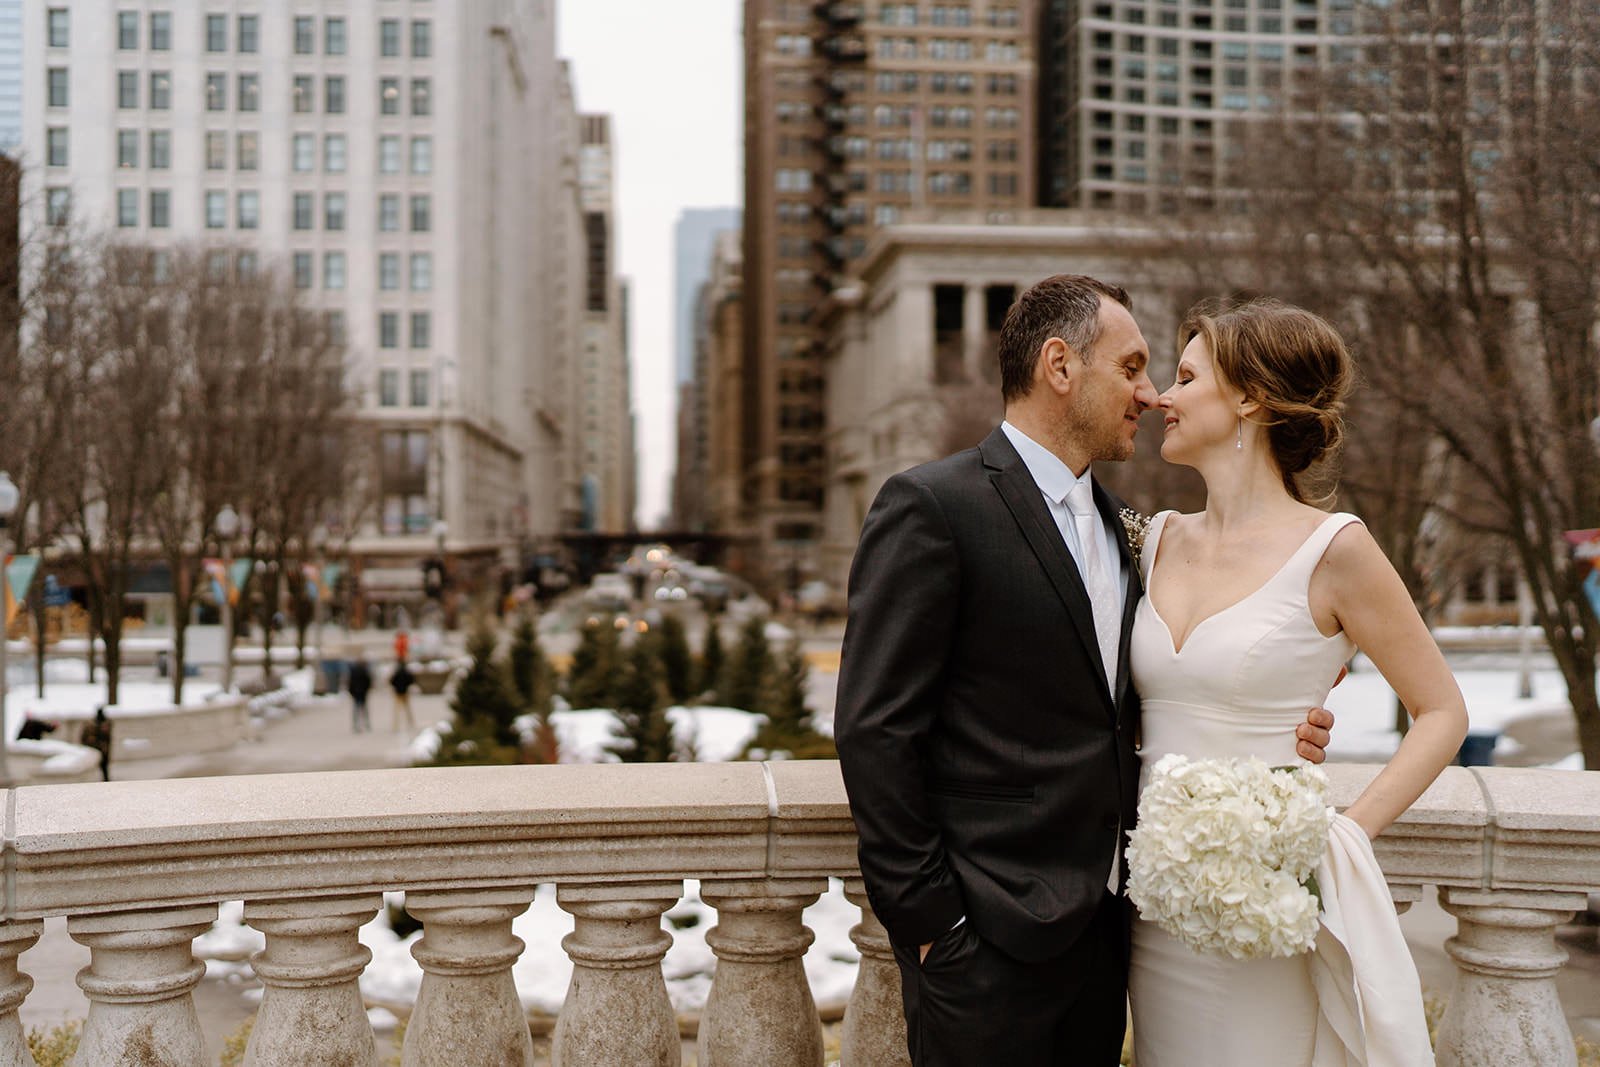 Where to take photos after your Chicago Elopement